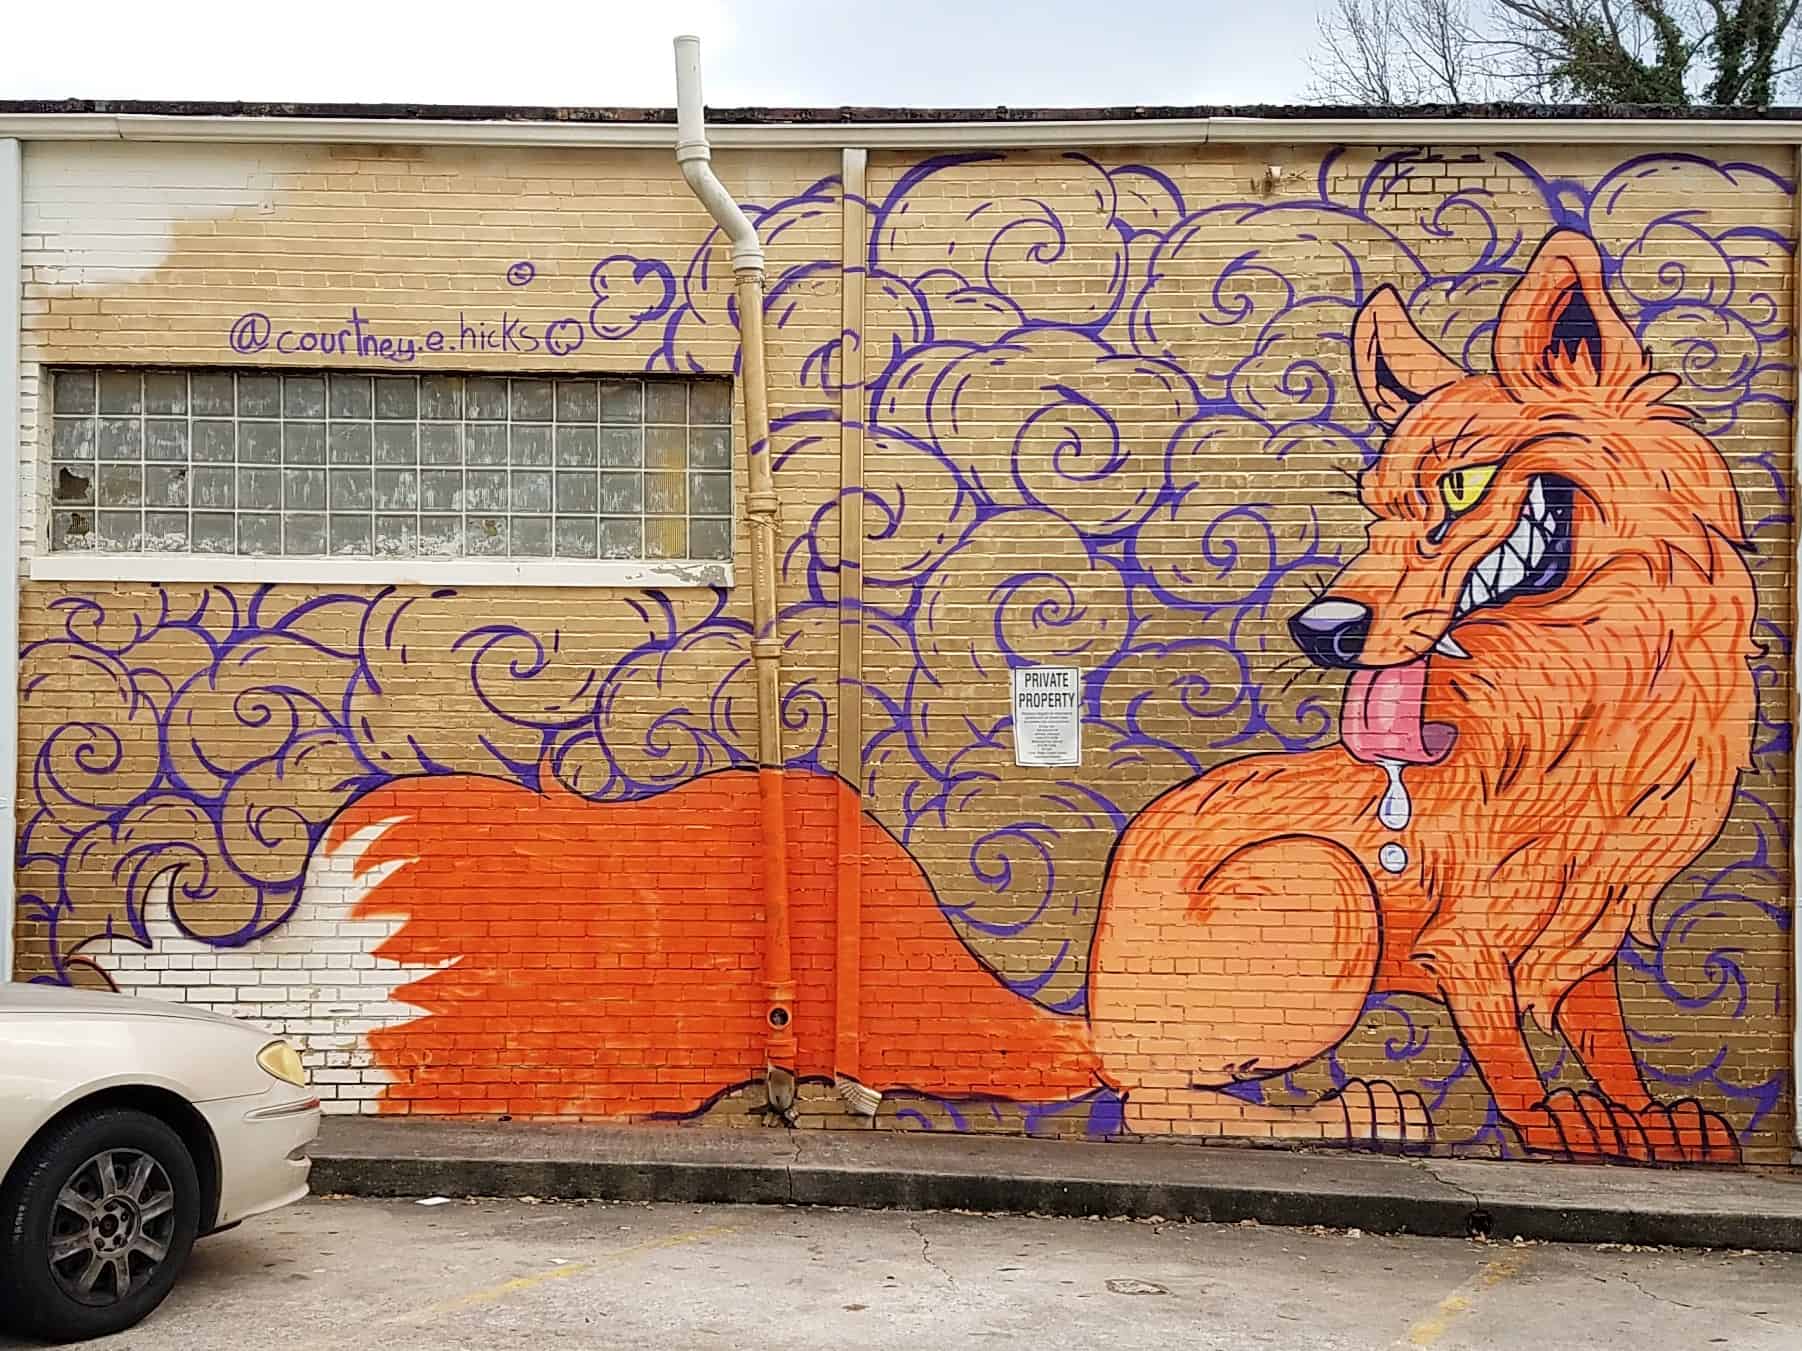 Mural by Courtney Hicks featuring a fox